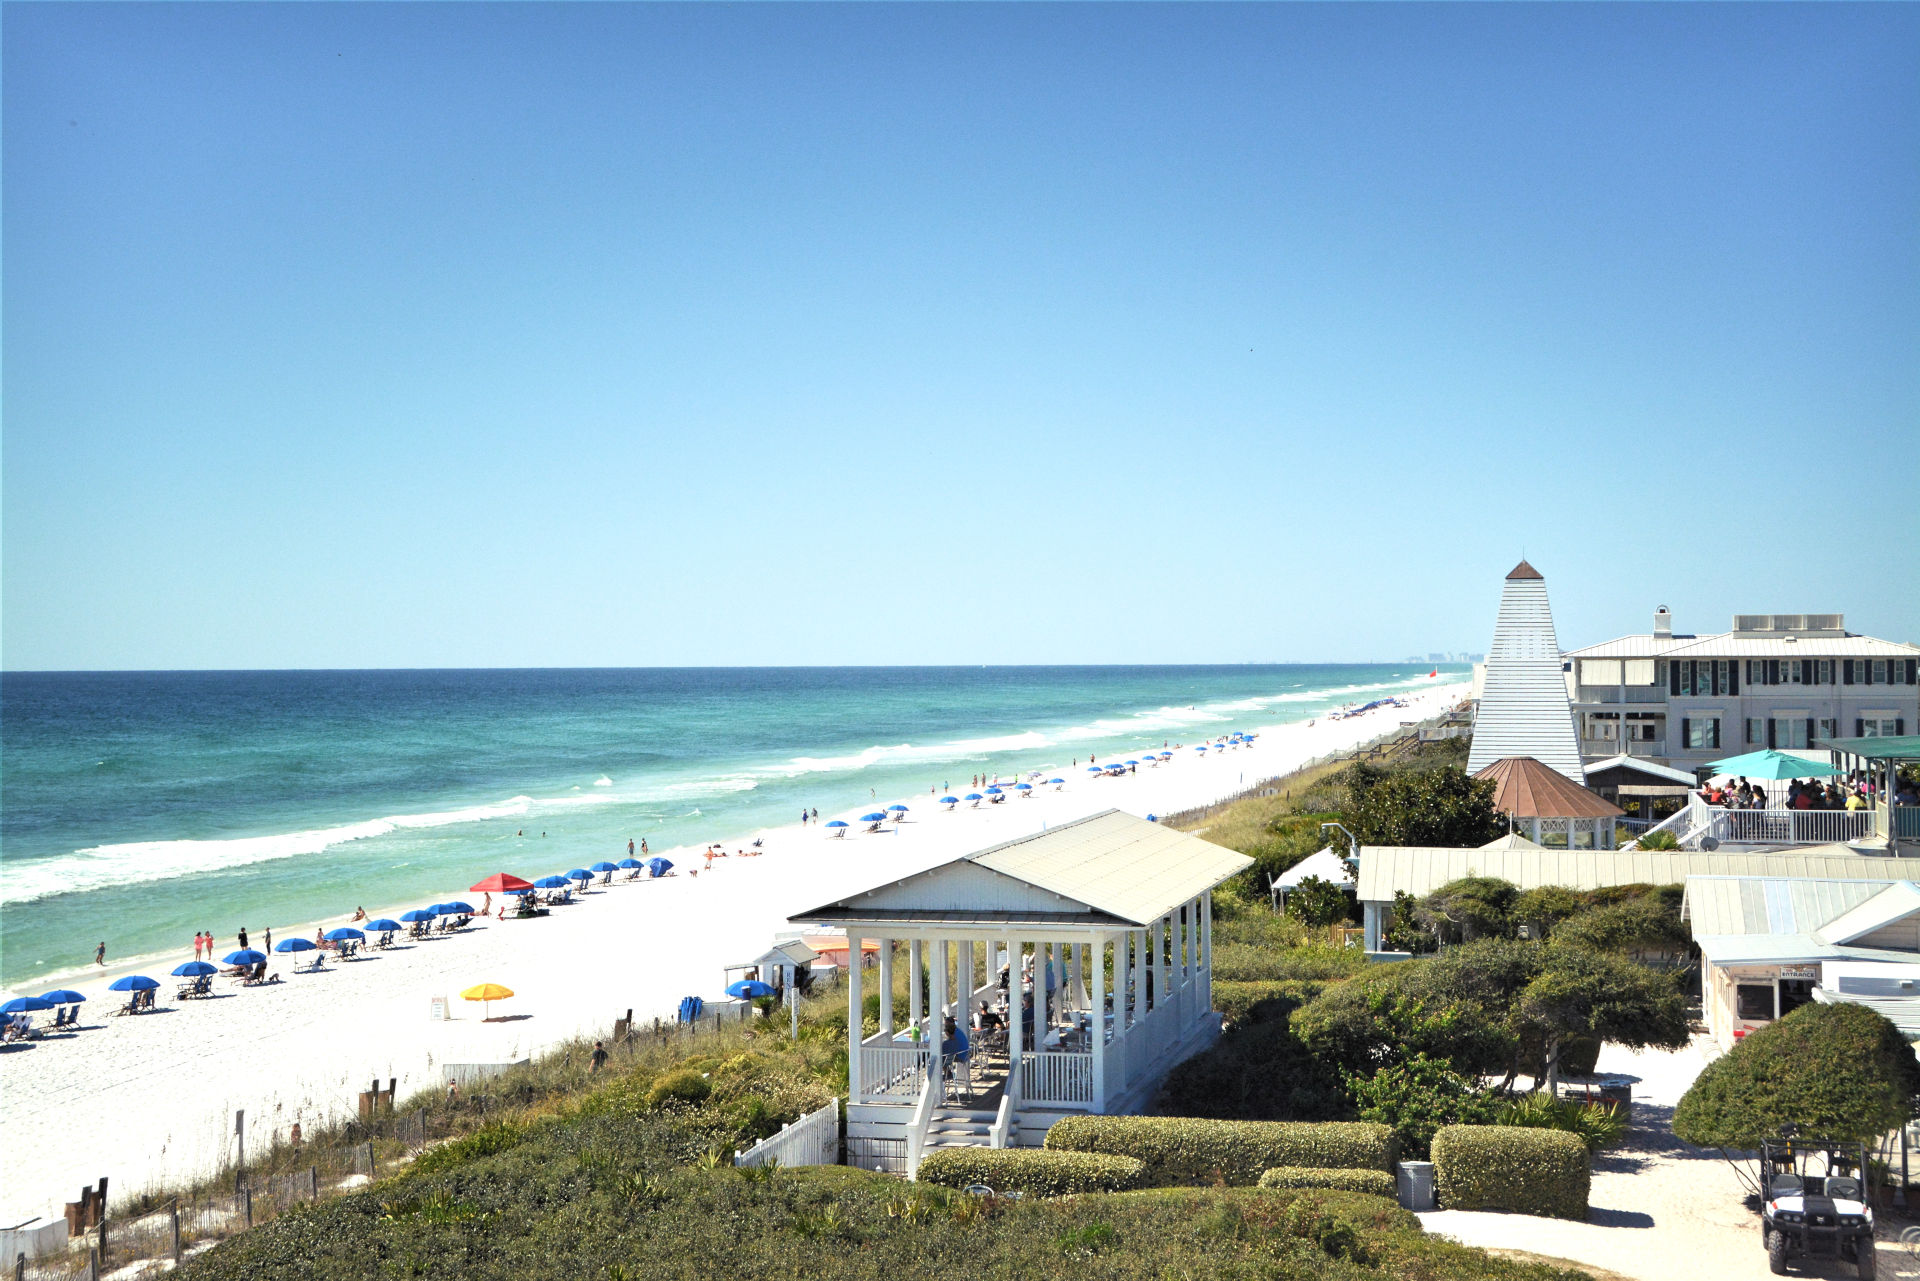 About the Beach you can visit from our vacation rentals on 30a